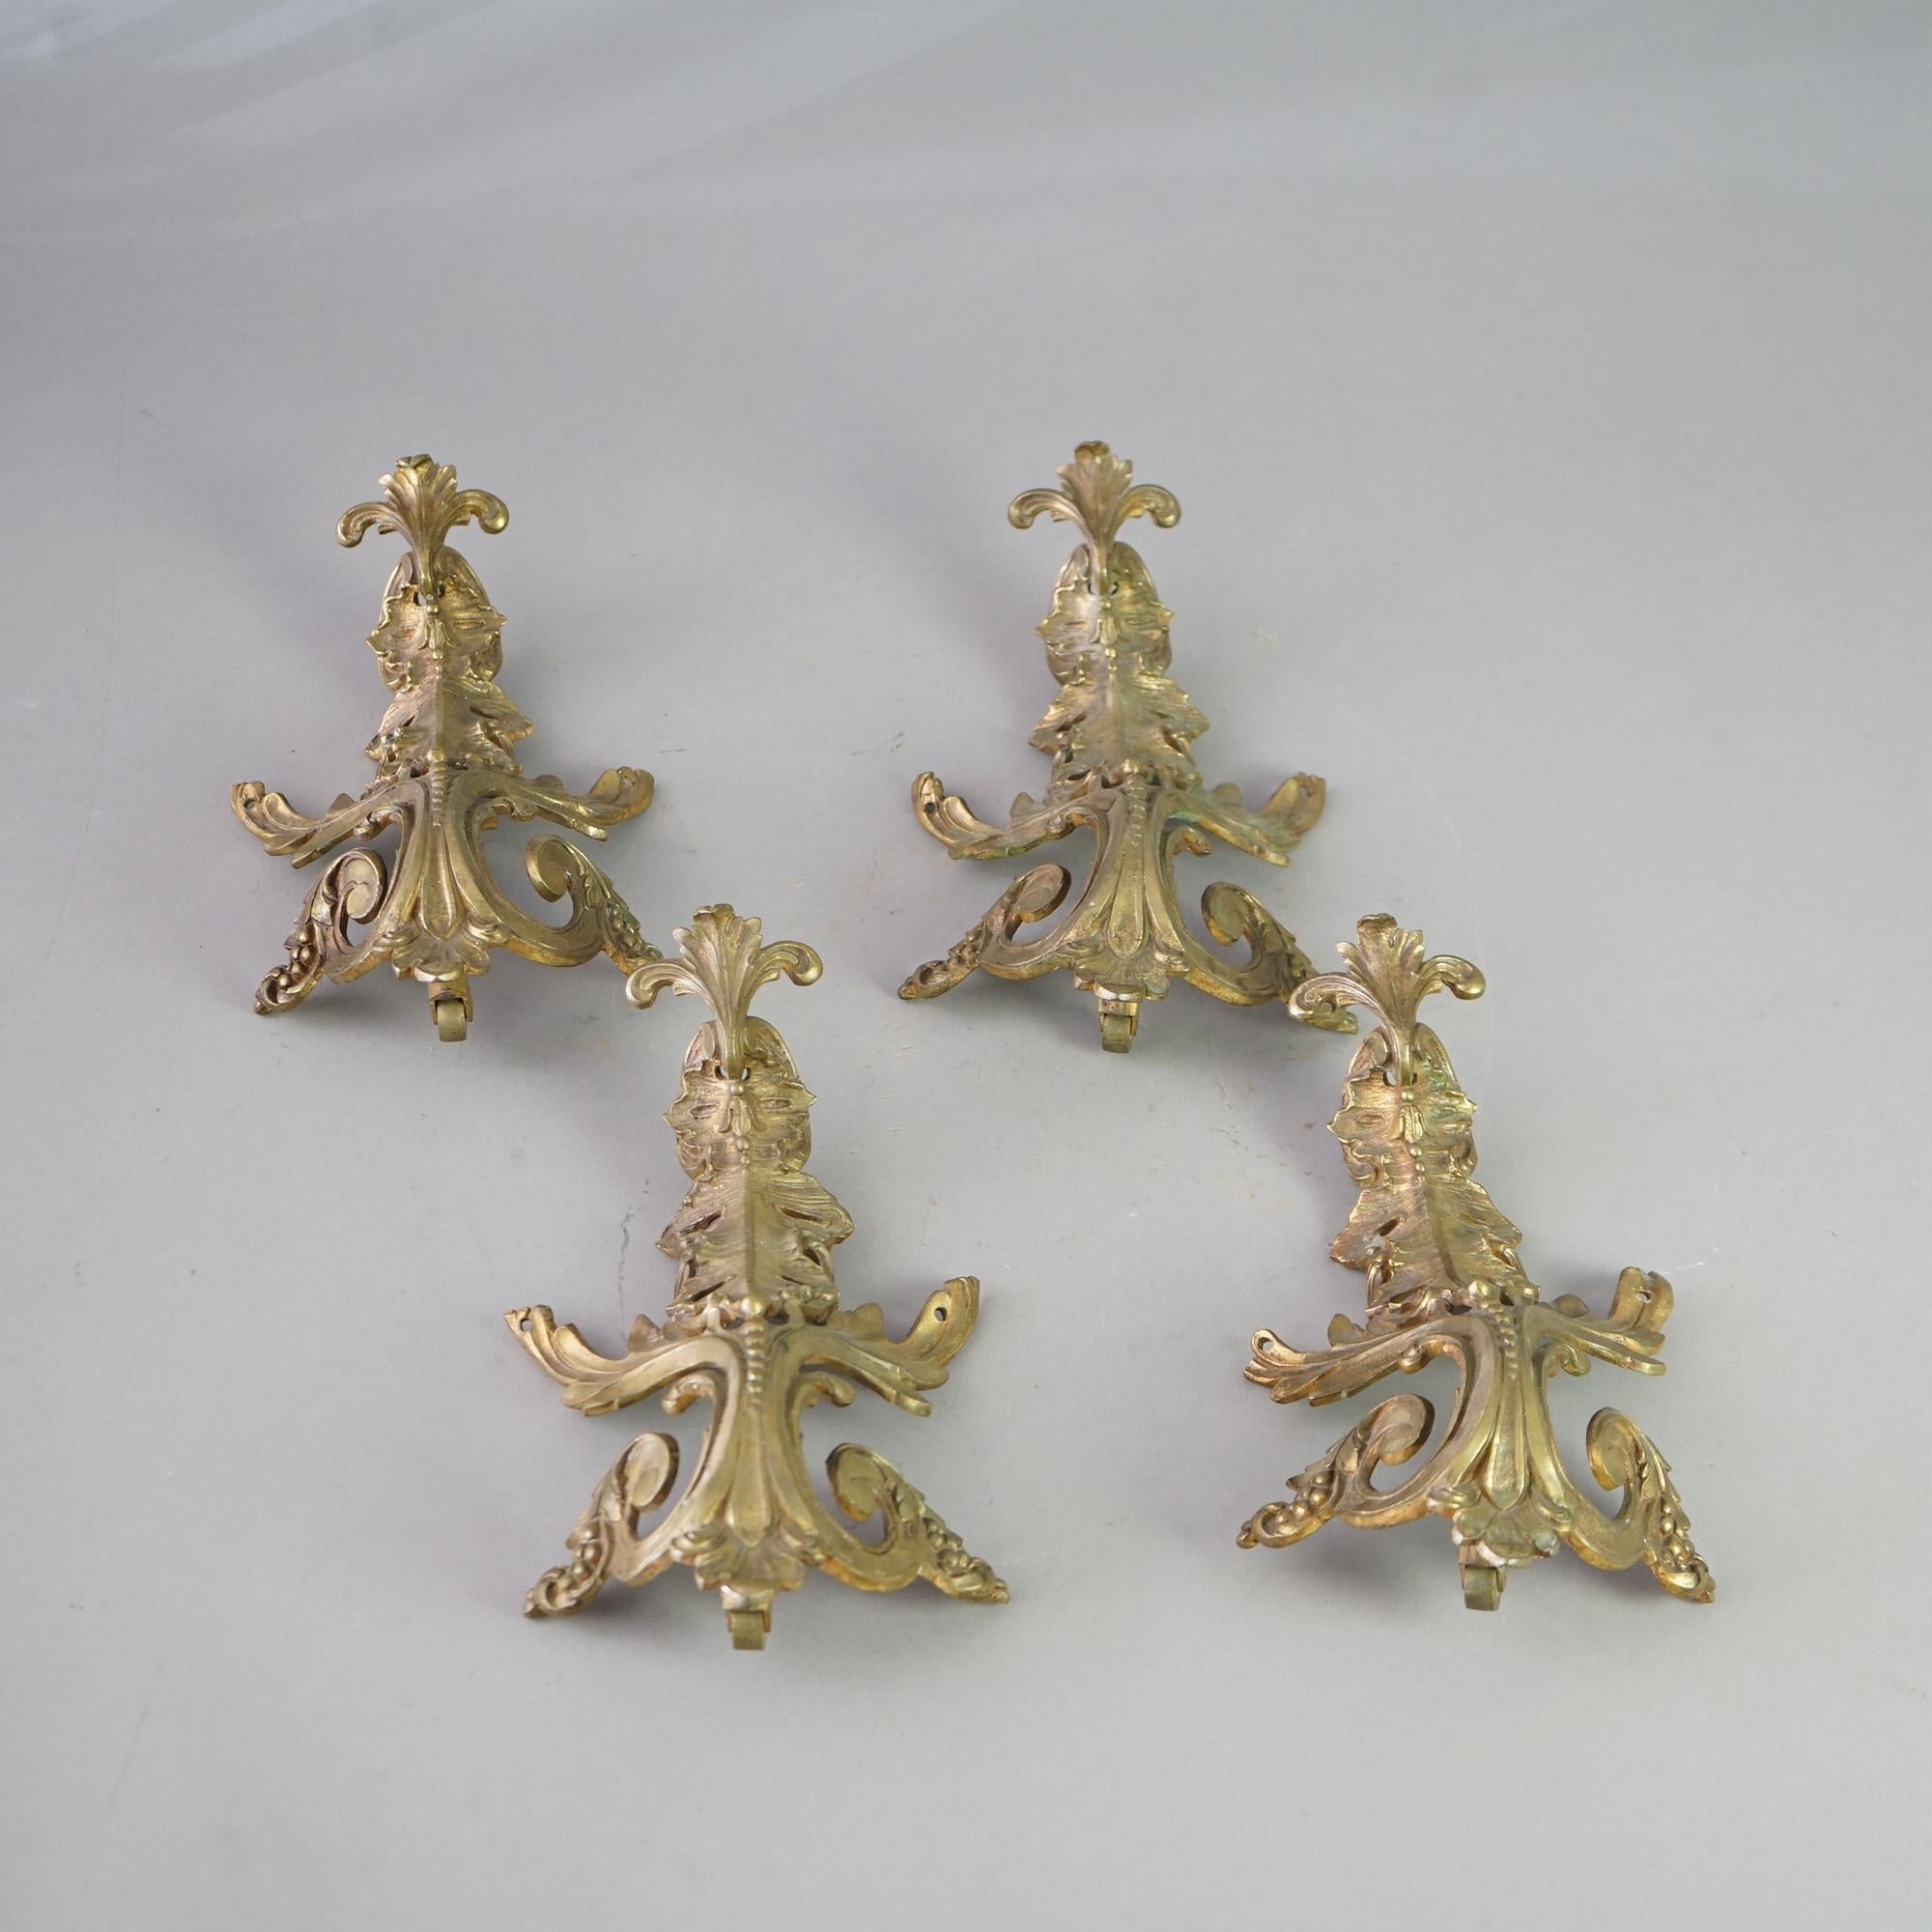 A set of four antique French Victorian architectural ormolu mounts offer cast bronze construction in scrolled foliate form, c1890

Measures - 10